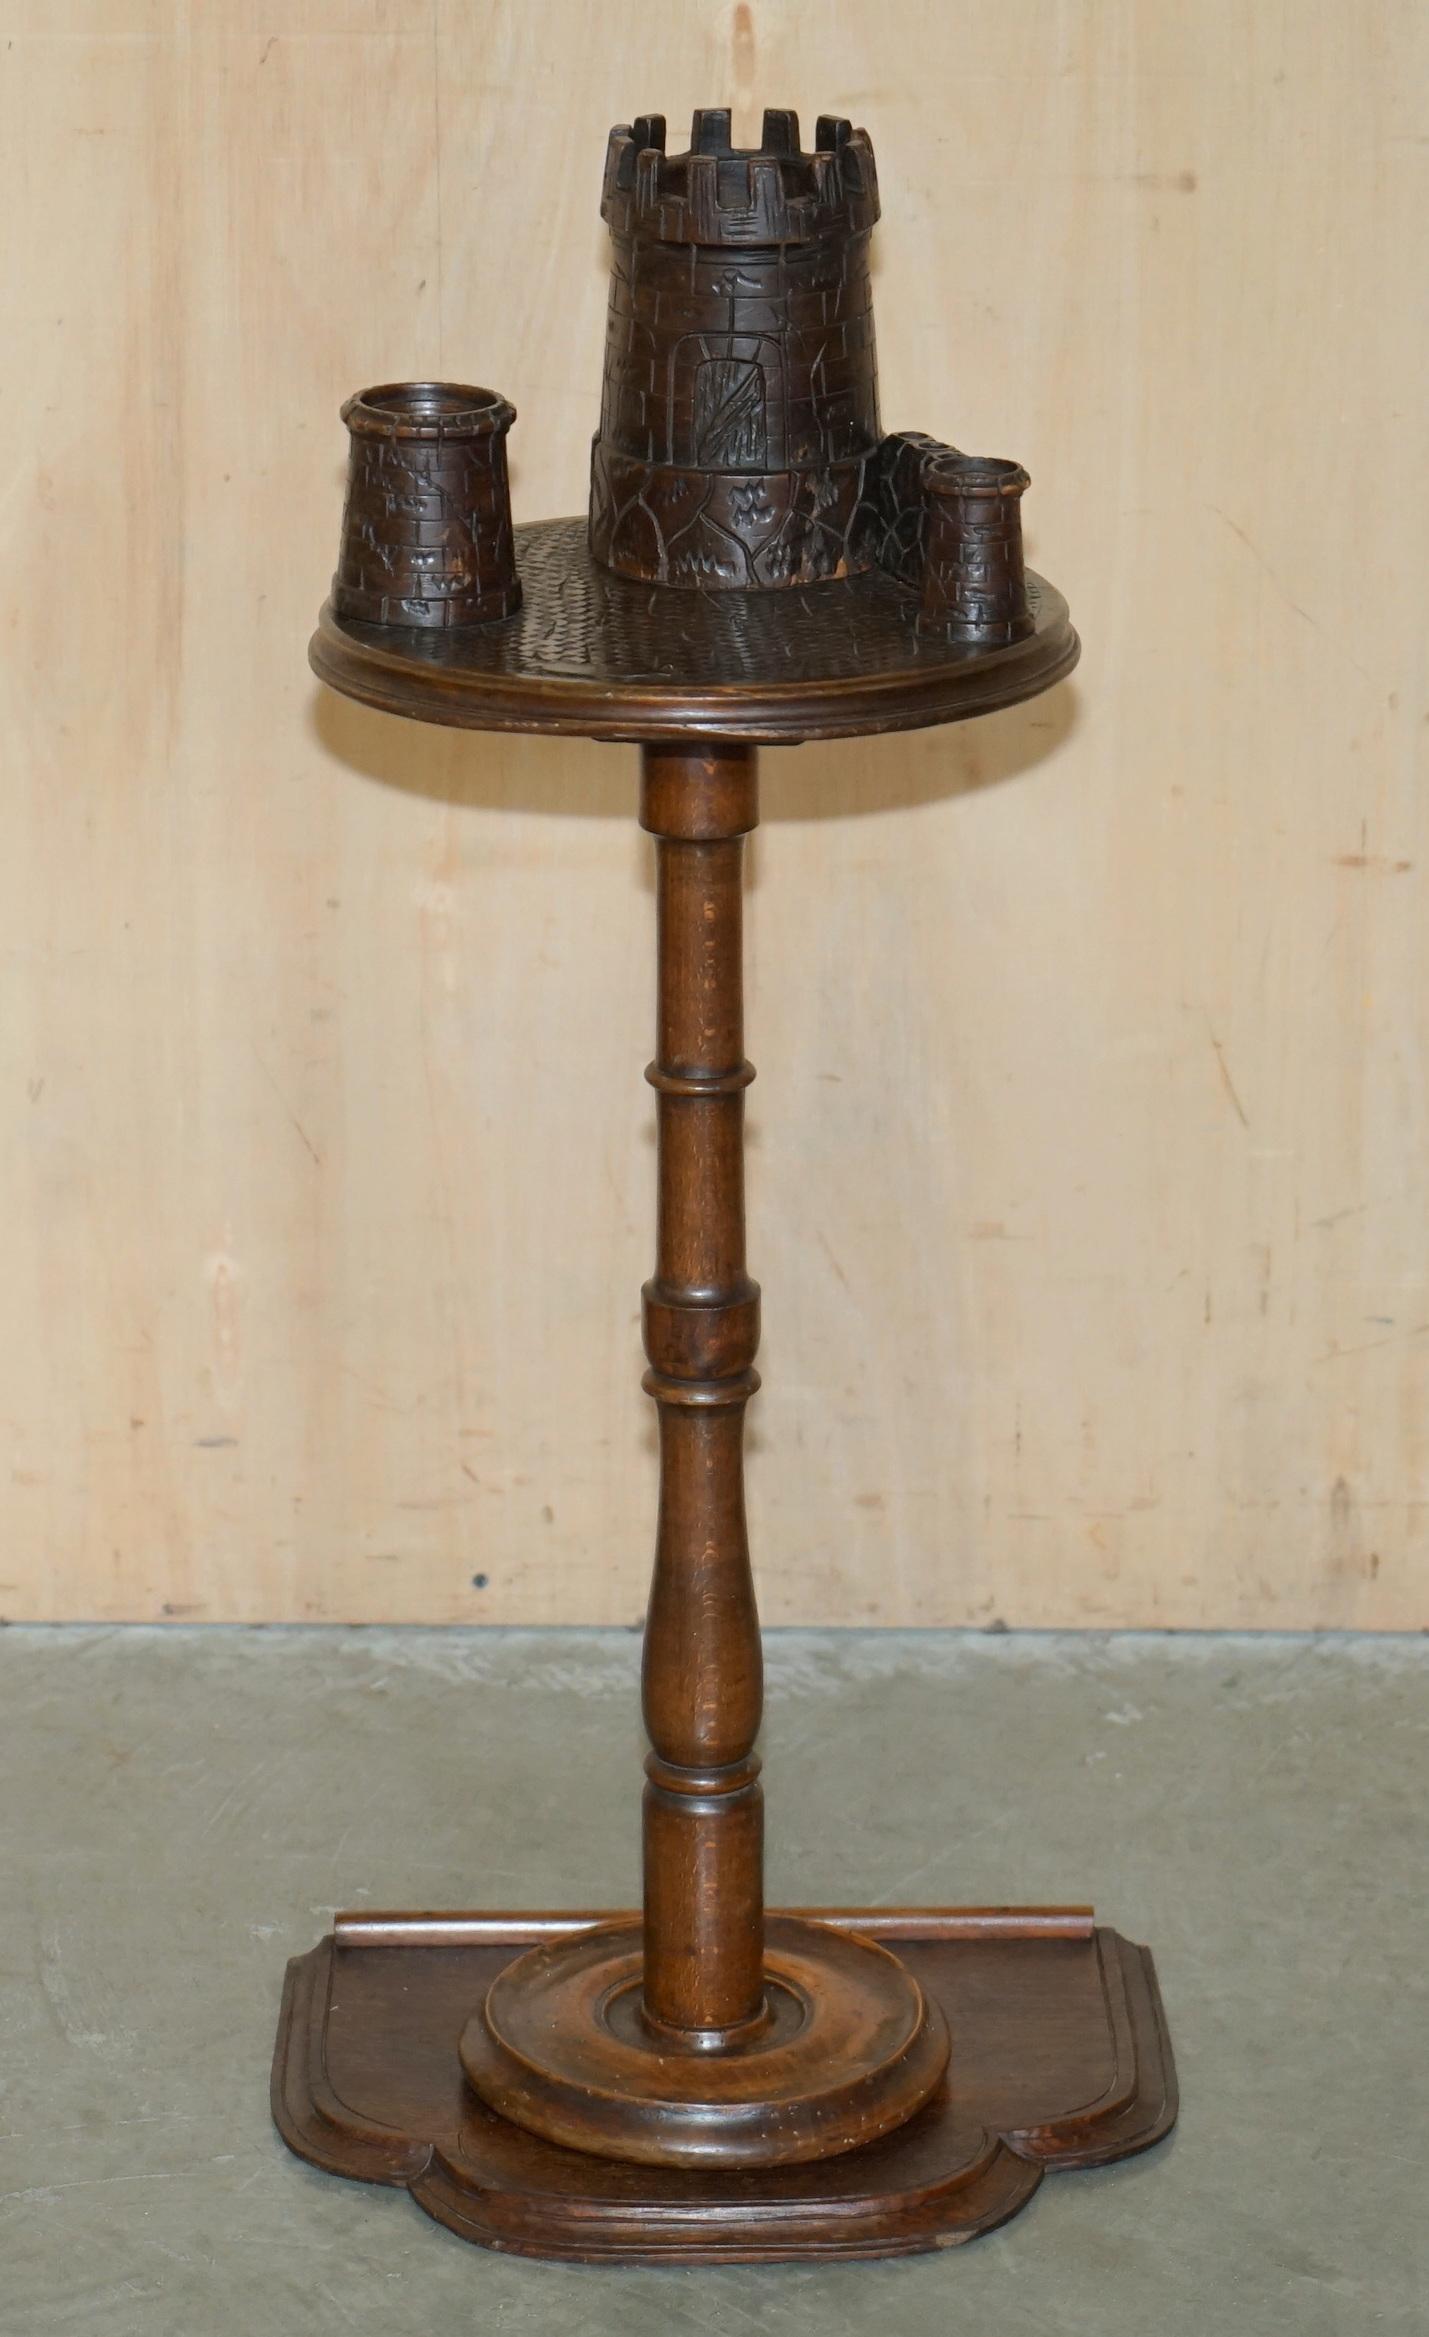 Royal House Antiques

Royal House Antiques is delighted to offer for sale this exquisitely crafted, Antique late Victorian Smokers side table depicting castle turrets for Cigars, Pipes & Tobacco 

Please note the delivery fee listed is just a guide,